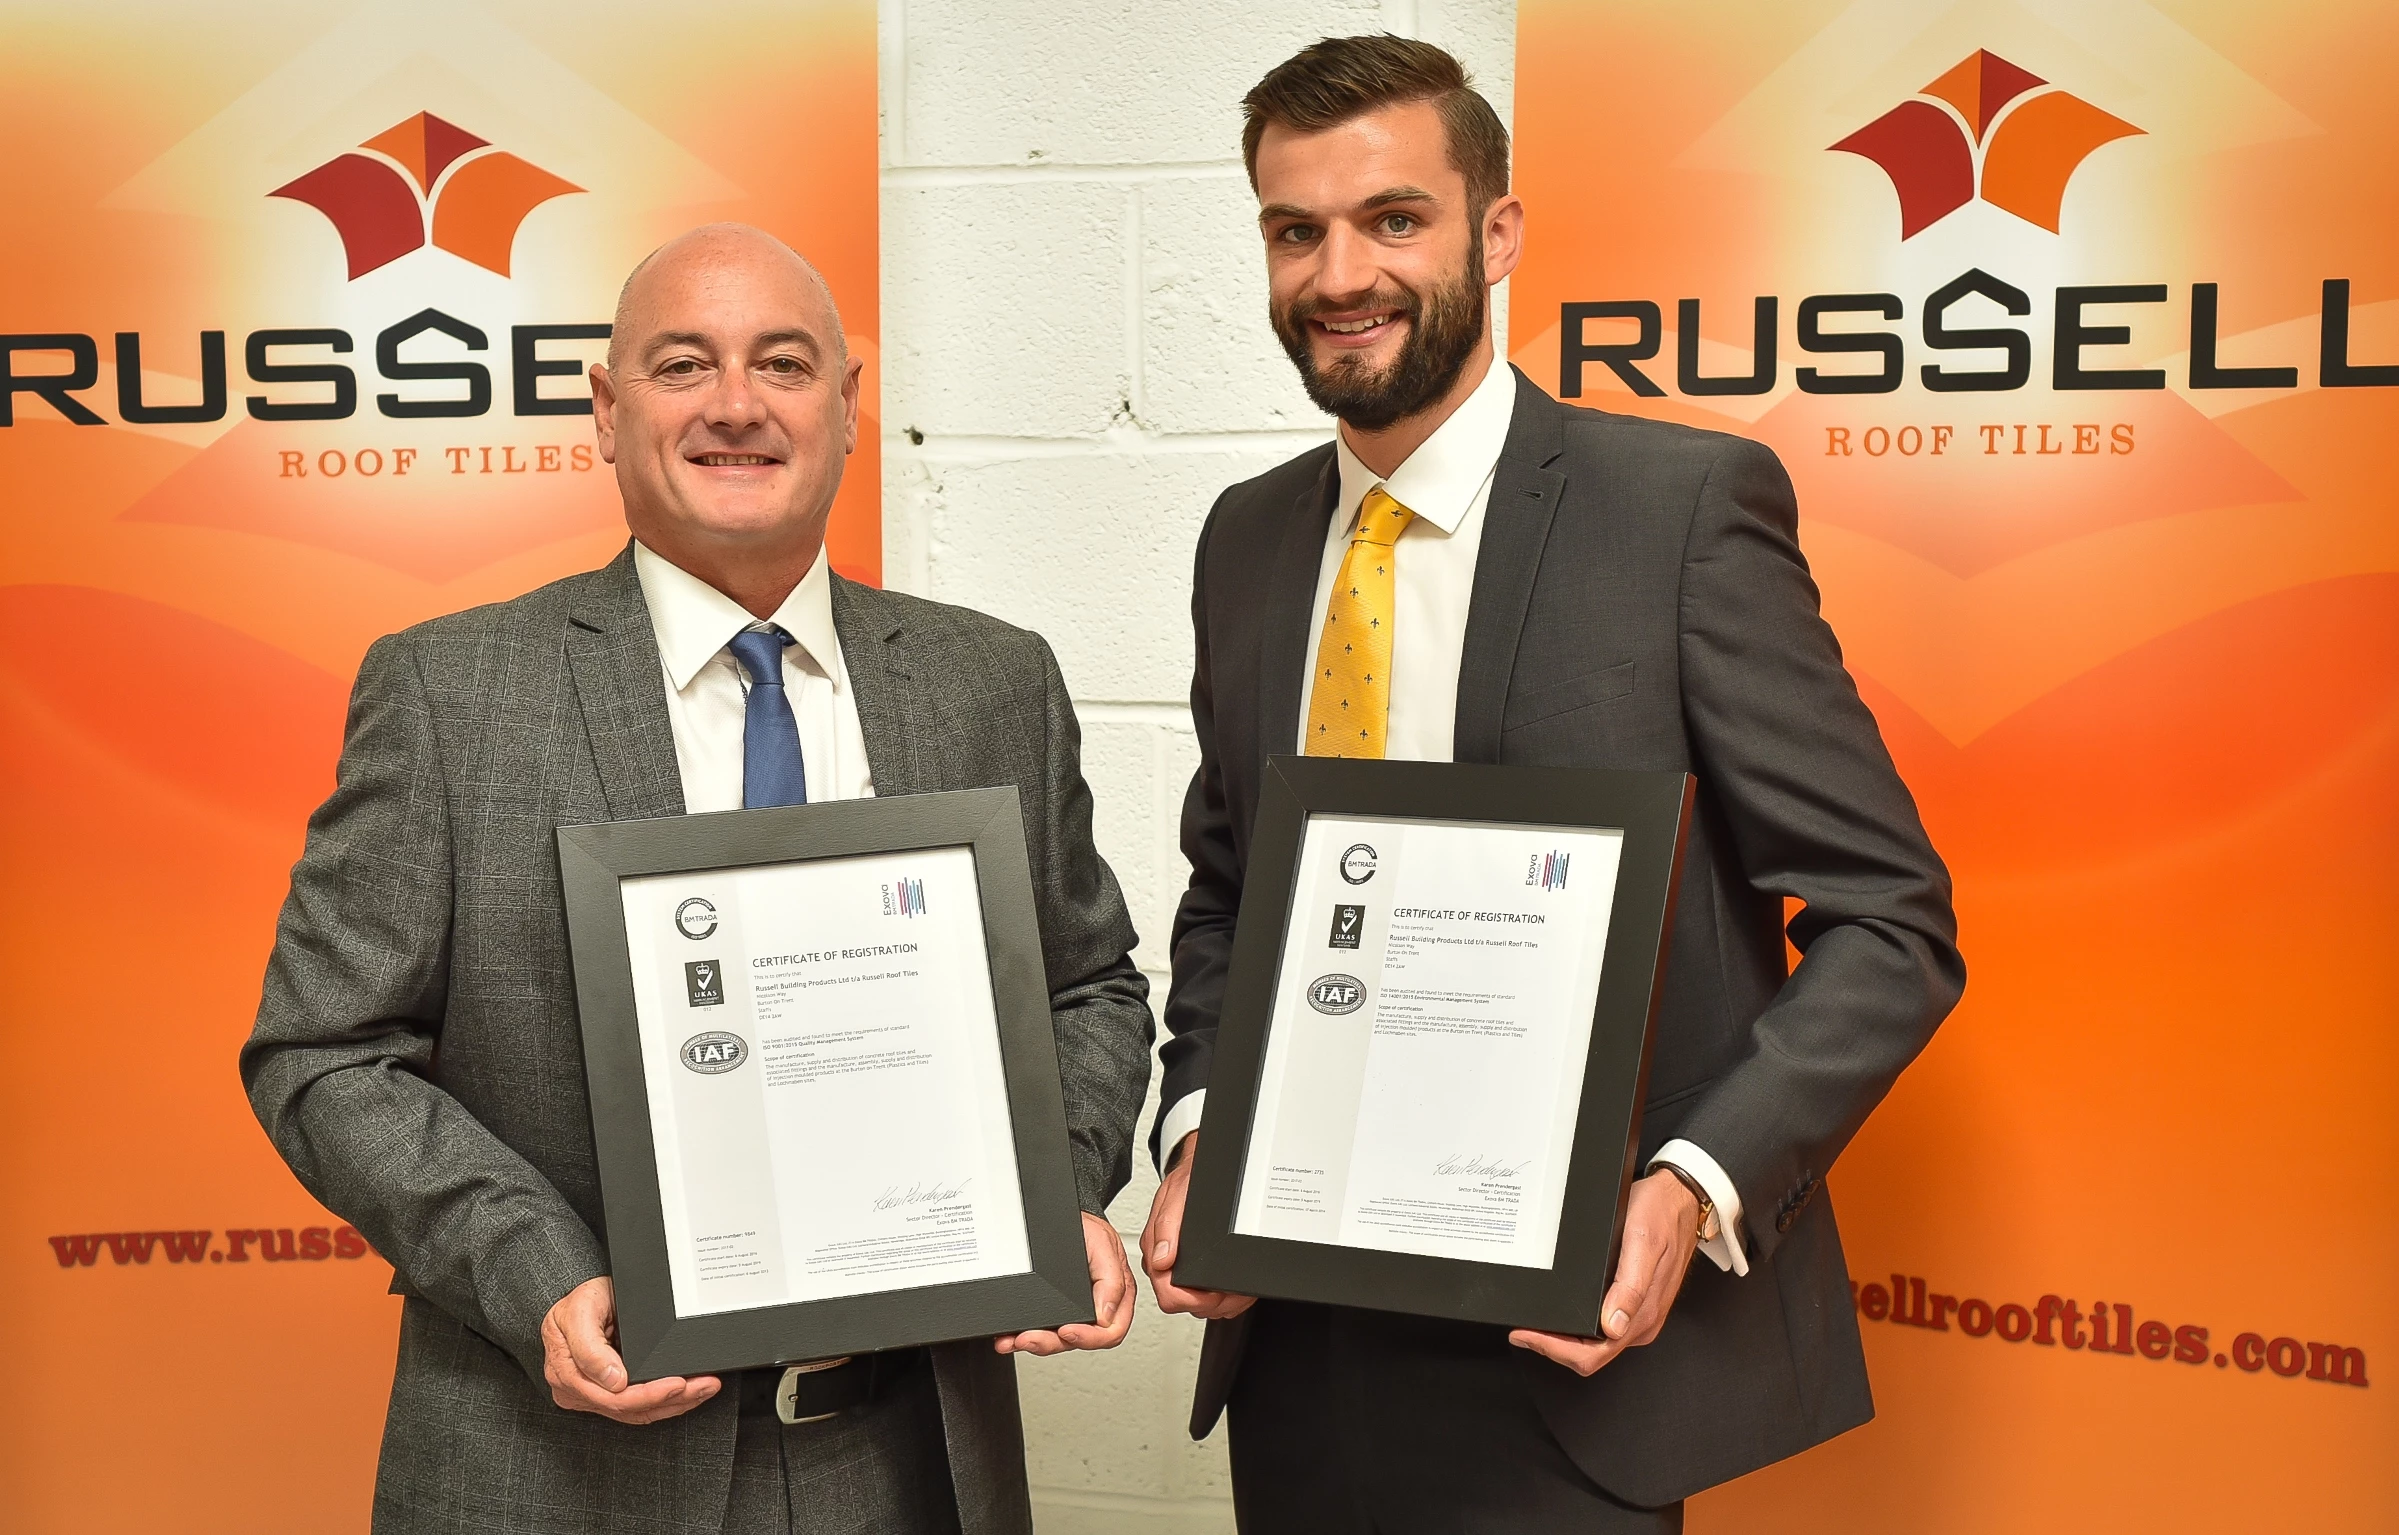 Andrew Hayward and Dan Hancox from Russell Roof Tiles 